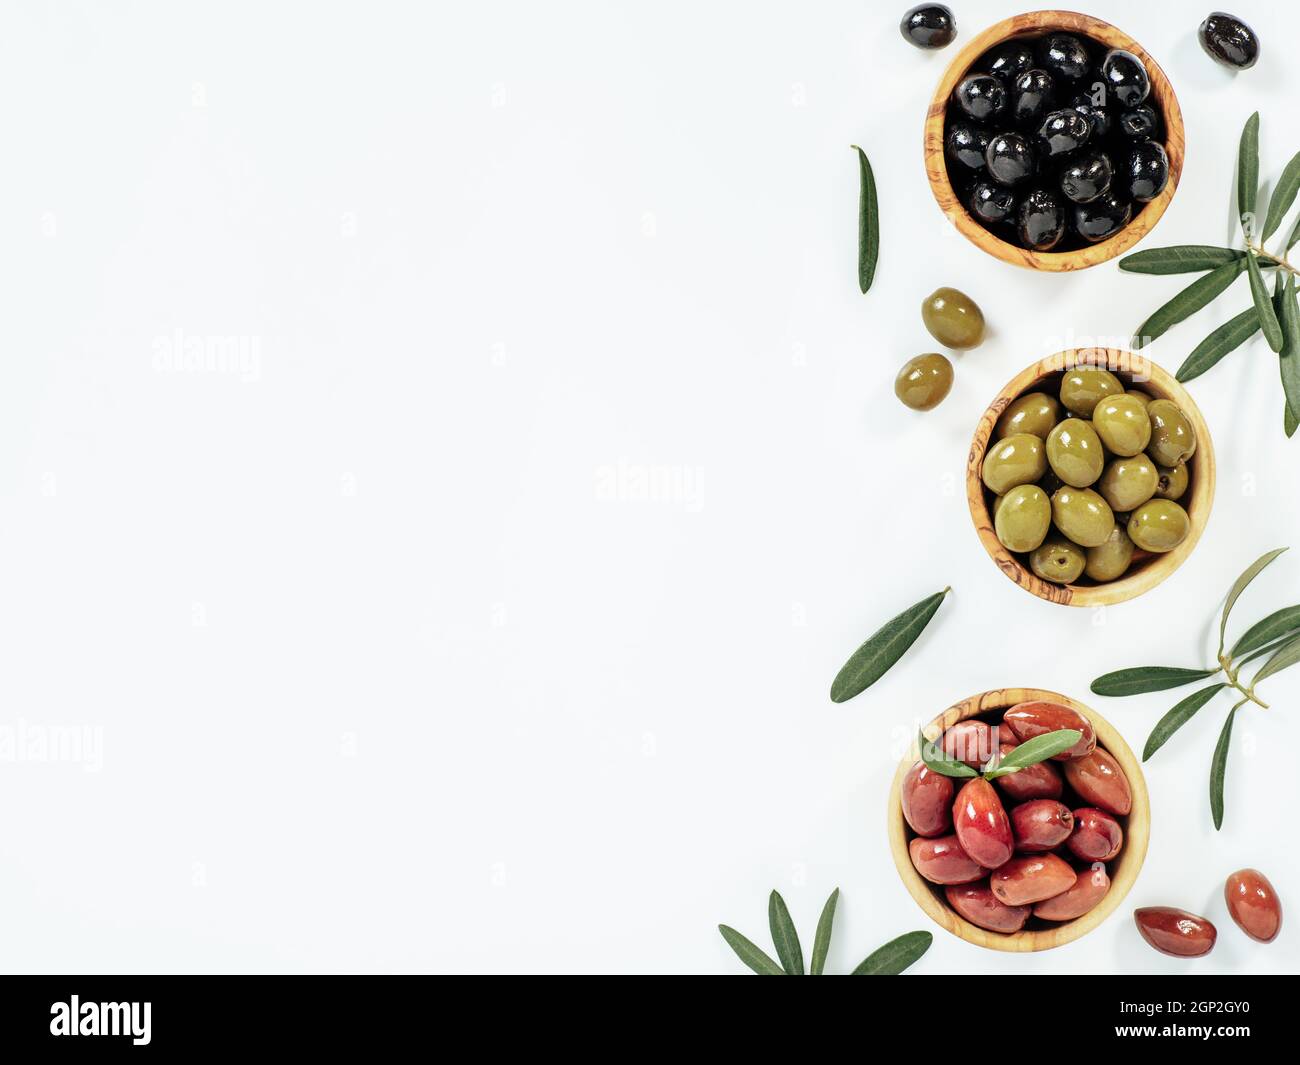 Set of green olives, black olives and red kalmata olives on white background,copy space. Top view of different olives types in bowls and leaves and br Stock Photo